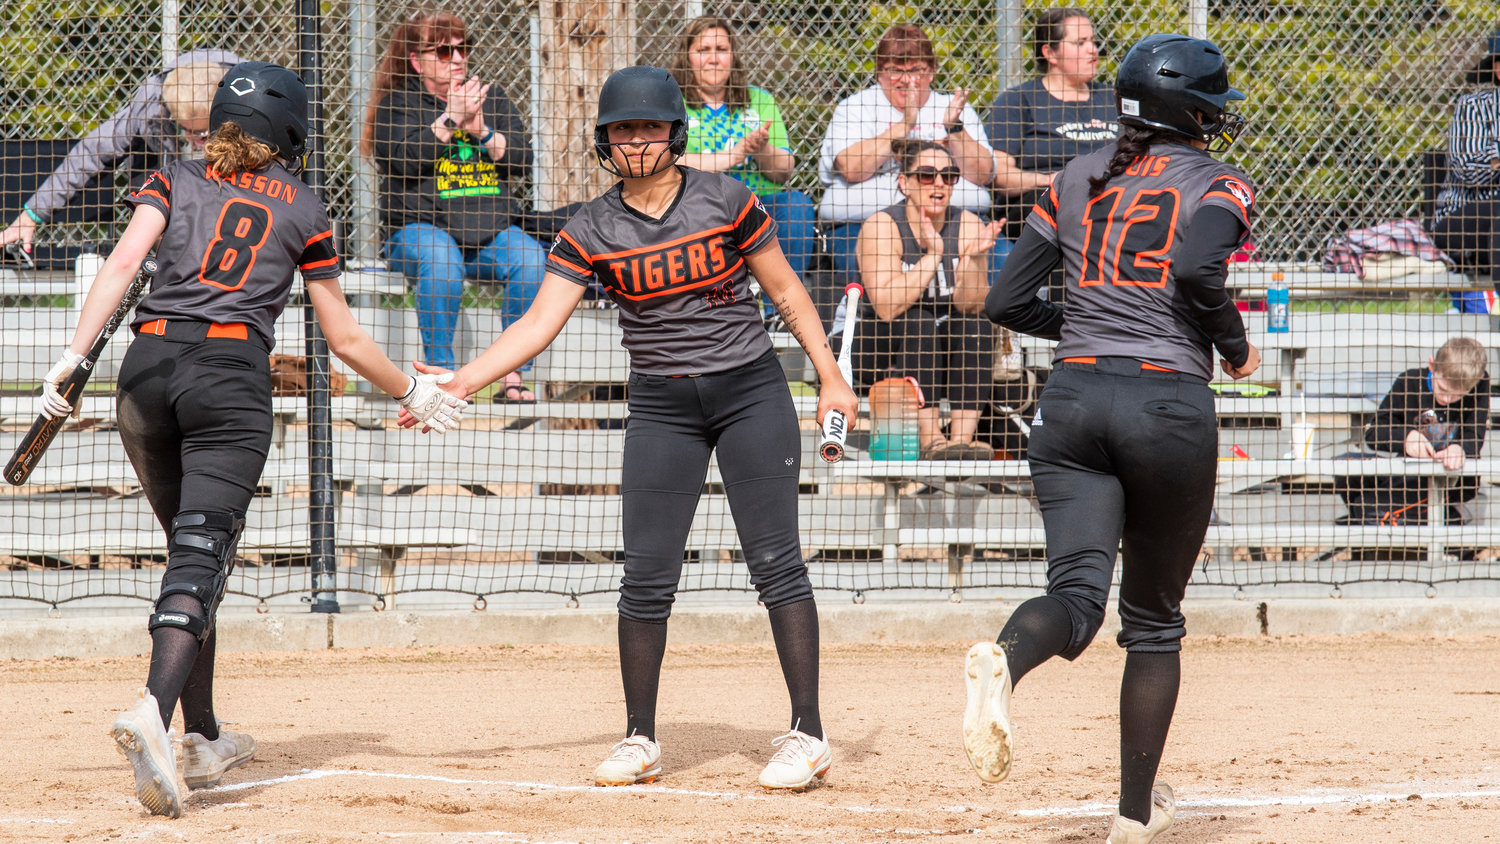 Centralia’s Lauren Wasson (8) and Makayla Chavez (10) high-five as Jimena Luis (12) runs toward the dugout during a game against W.F. West on Wednesday.